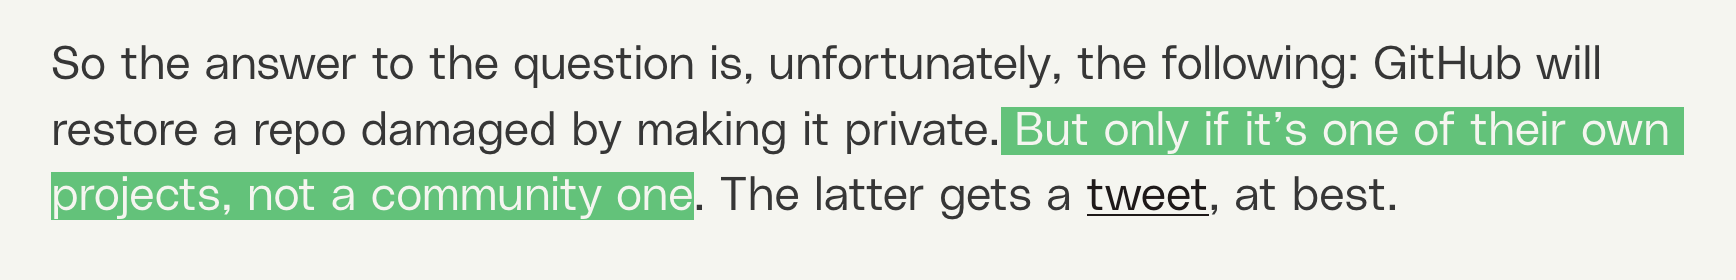 So the answer to the question is, unfortunately, the following: GitHub will restore a repo damaged by making it private. But only if it’s one of their own projects, not a community one. The latter gets a tweet, at best.